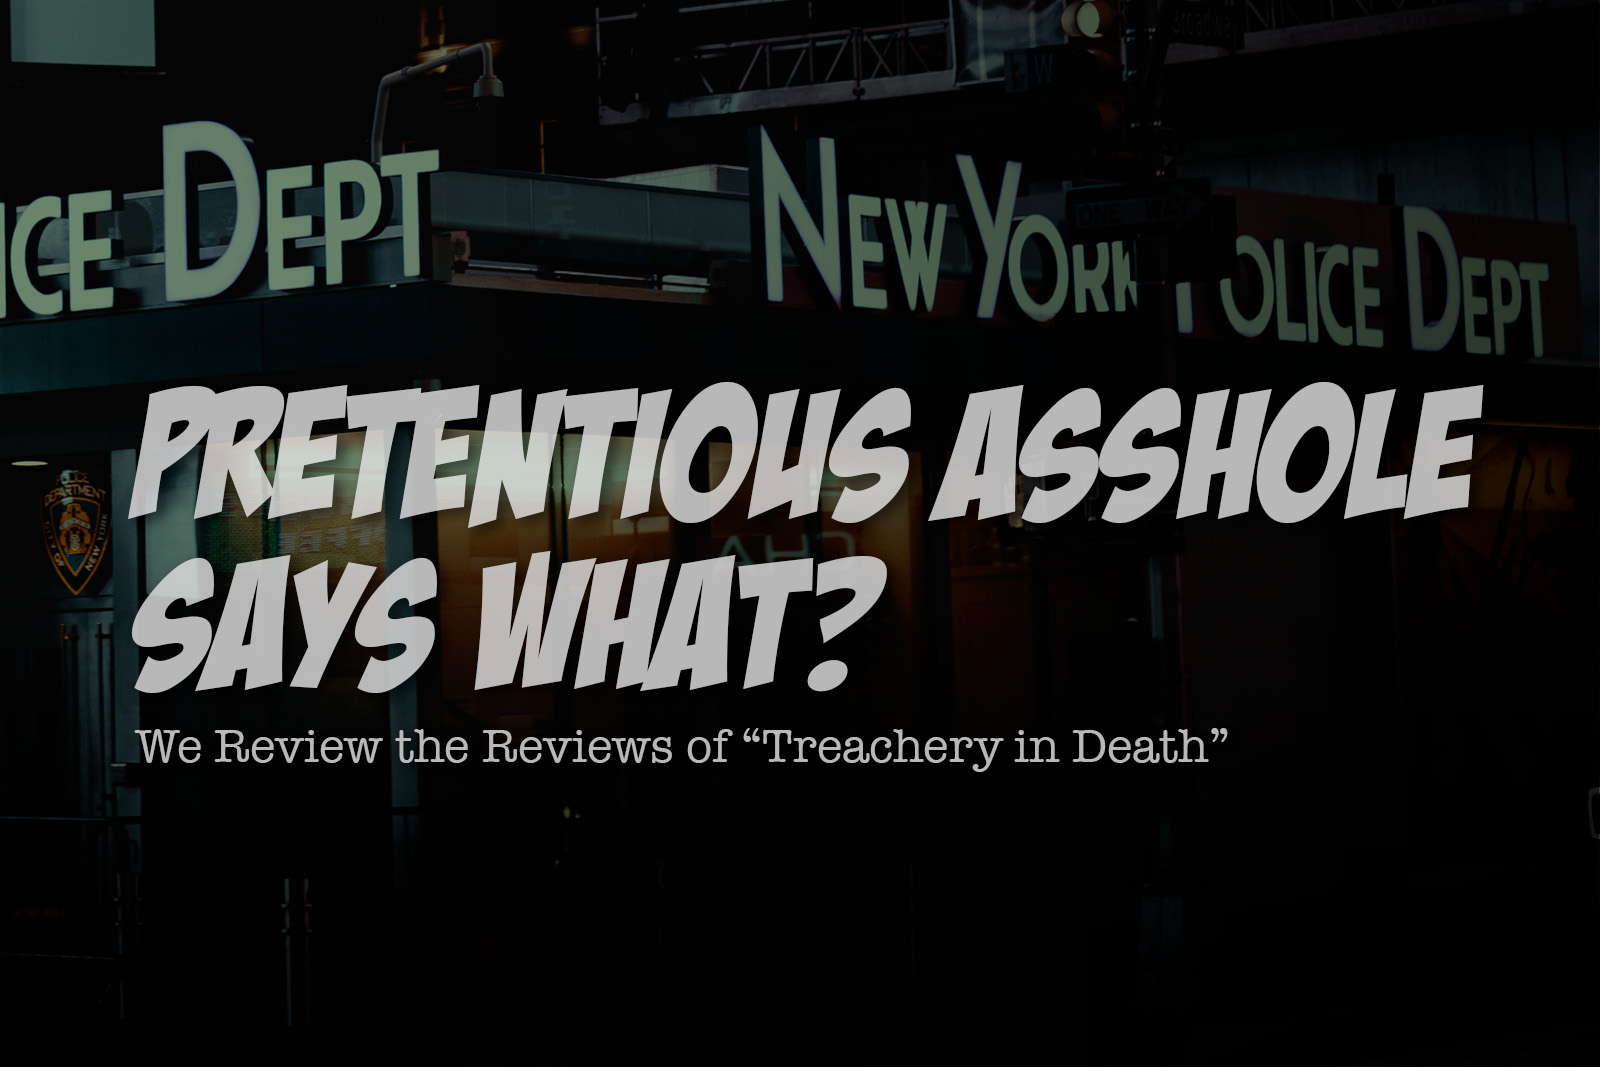 Pretentious Asshole Says What? We Review the Reviews of “Treachery in Death”